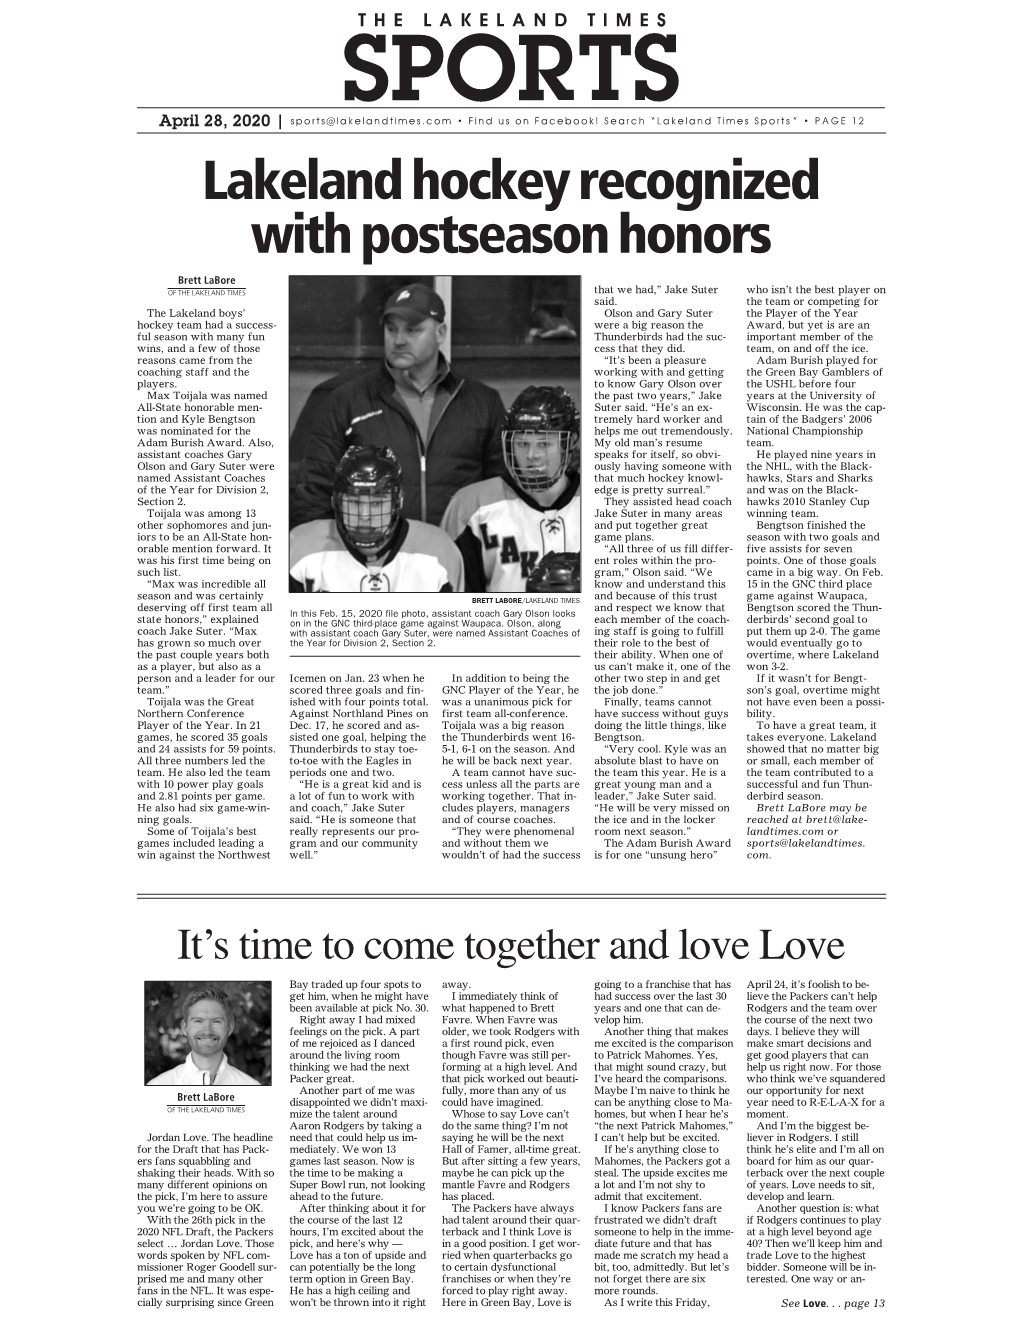 Lakeland Hockey Recognized with Postseason Honors Brett Labore of the LAKELAND TIMES That We Had,” Jake Suter Who Isn’T the Best Player on Said